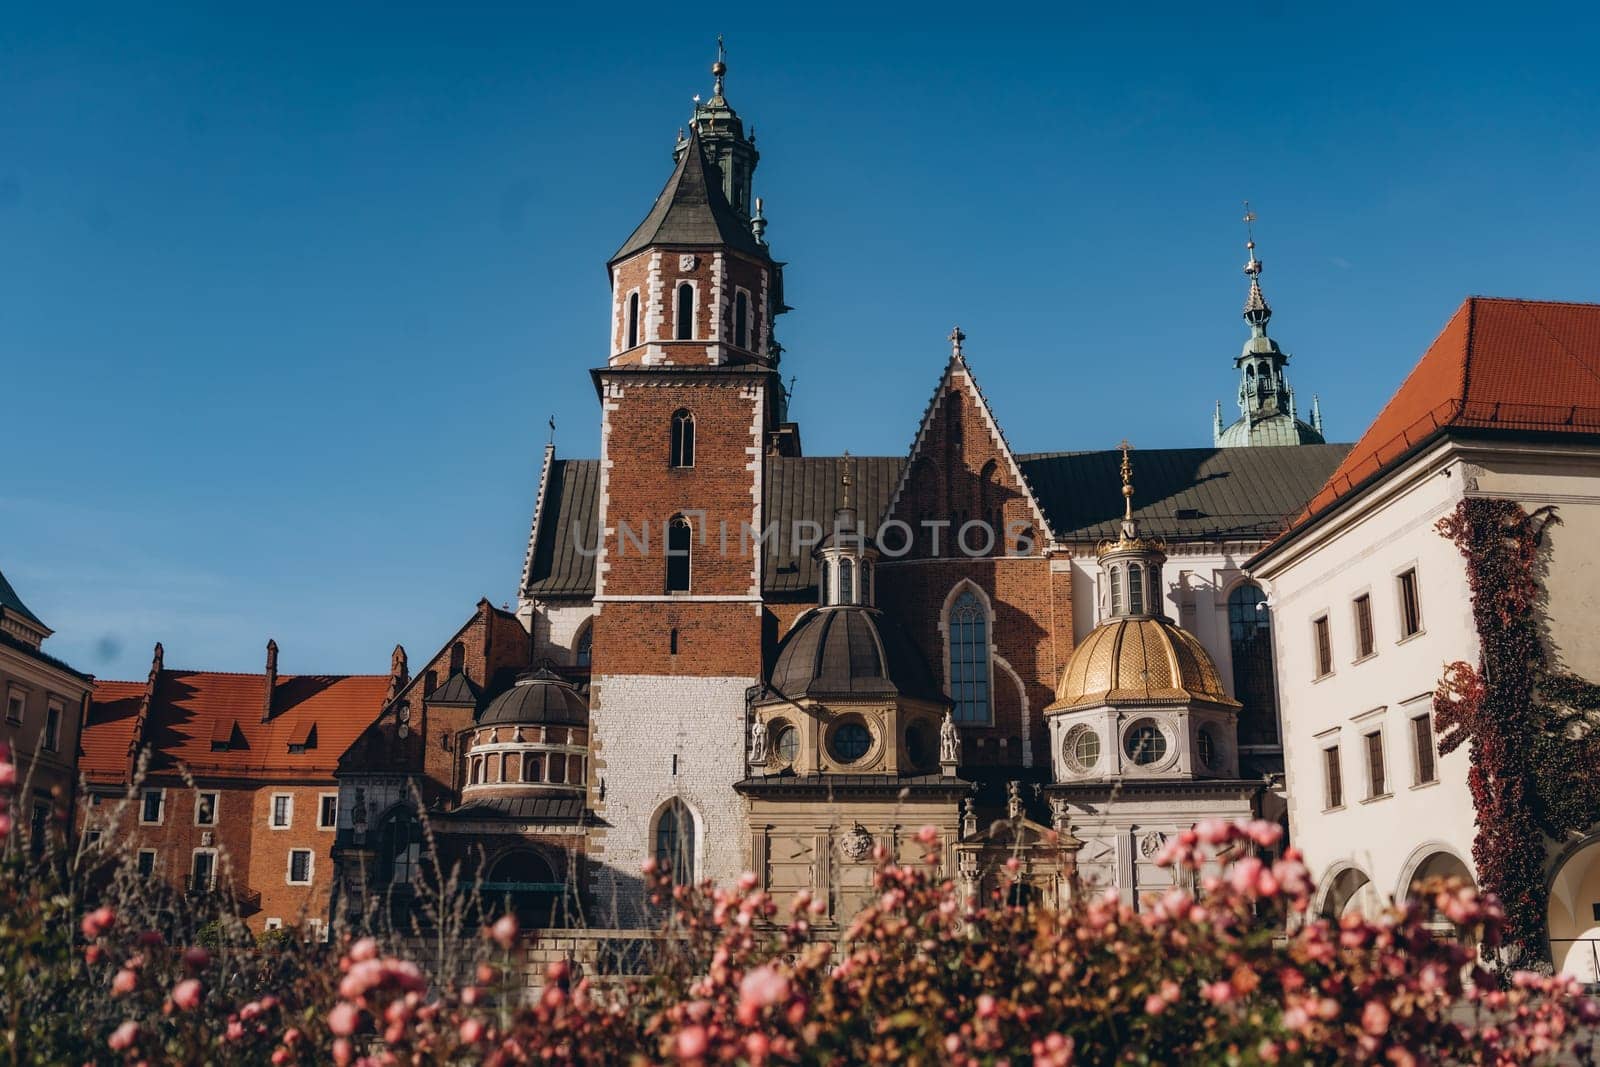 Autumn view of garden with roses and Wawel Royal Castle complex in Krakow, Poland